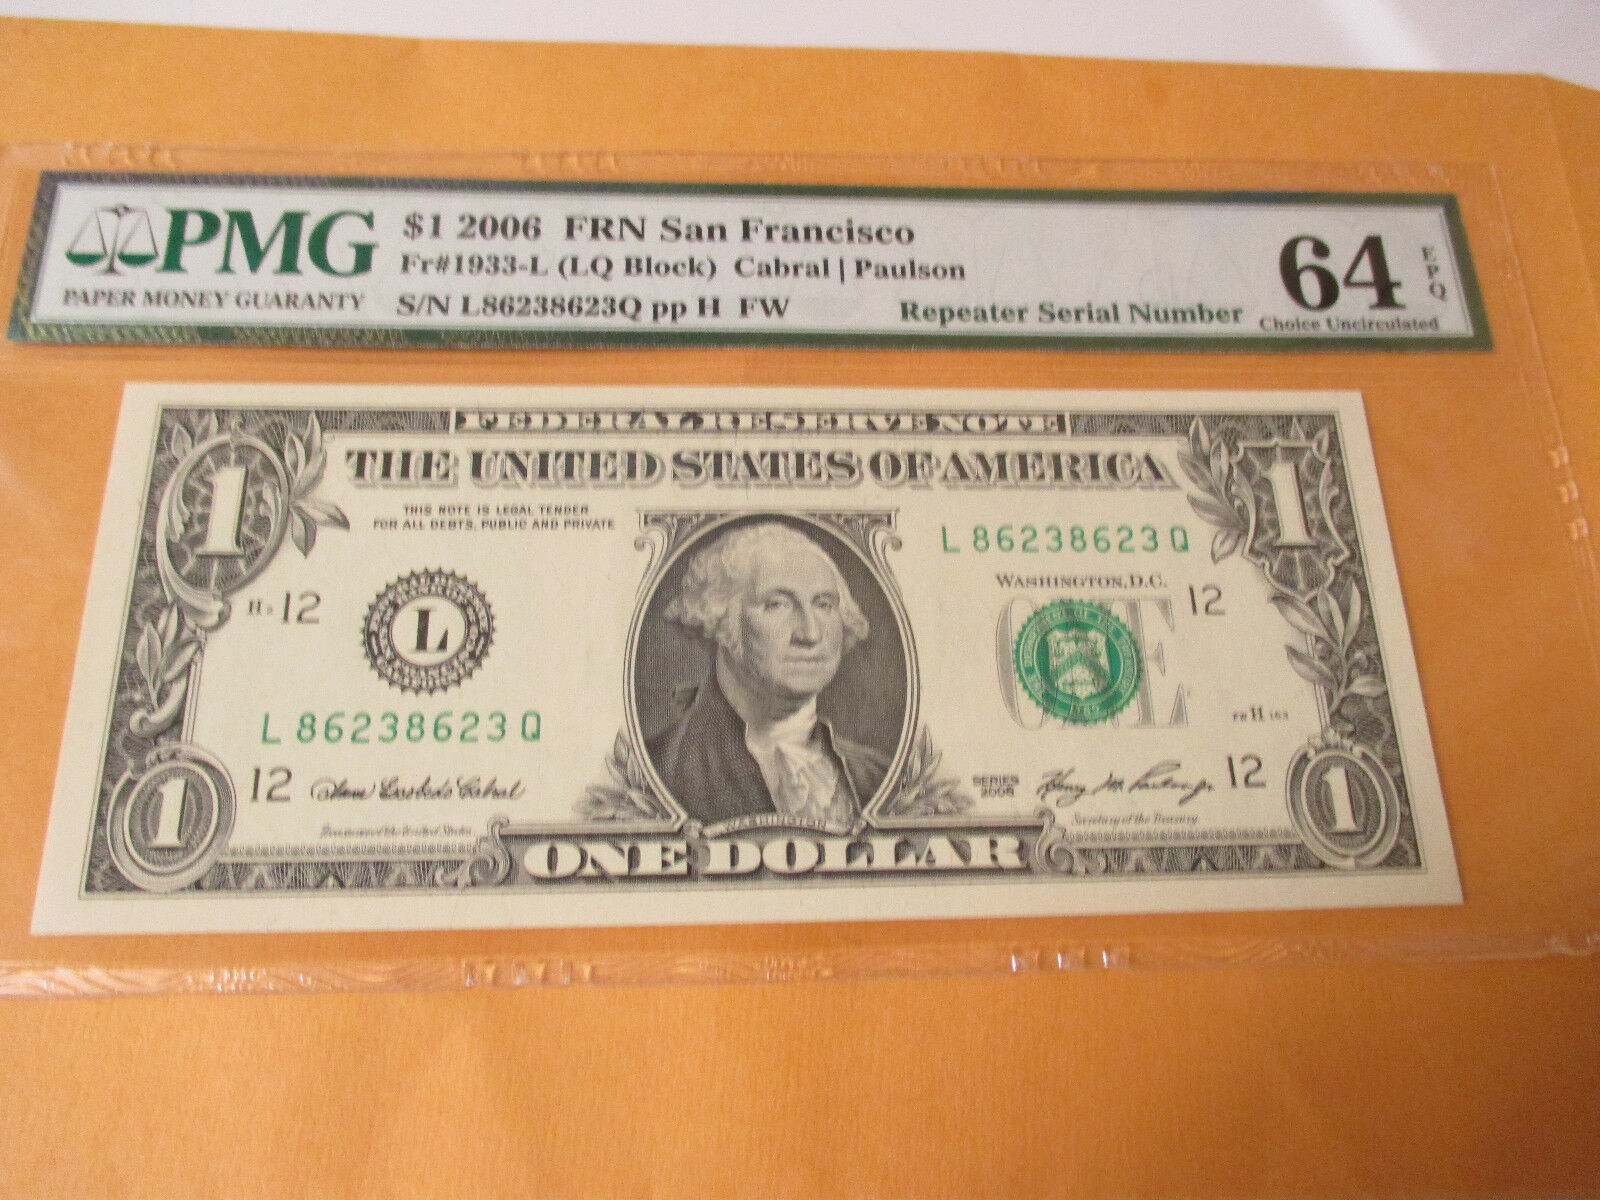 2006 $1 Federal Reserve Note Repeater Serial Number Pmg 64epq